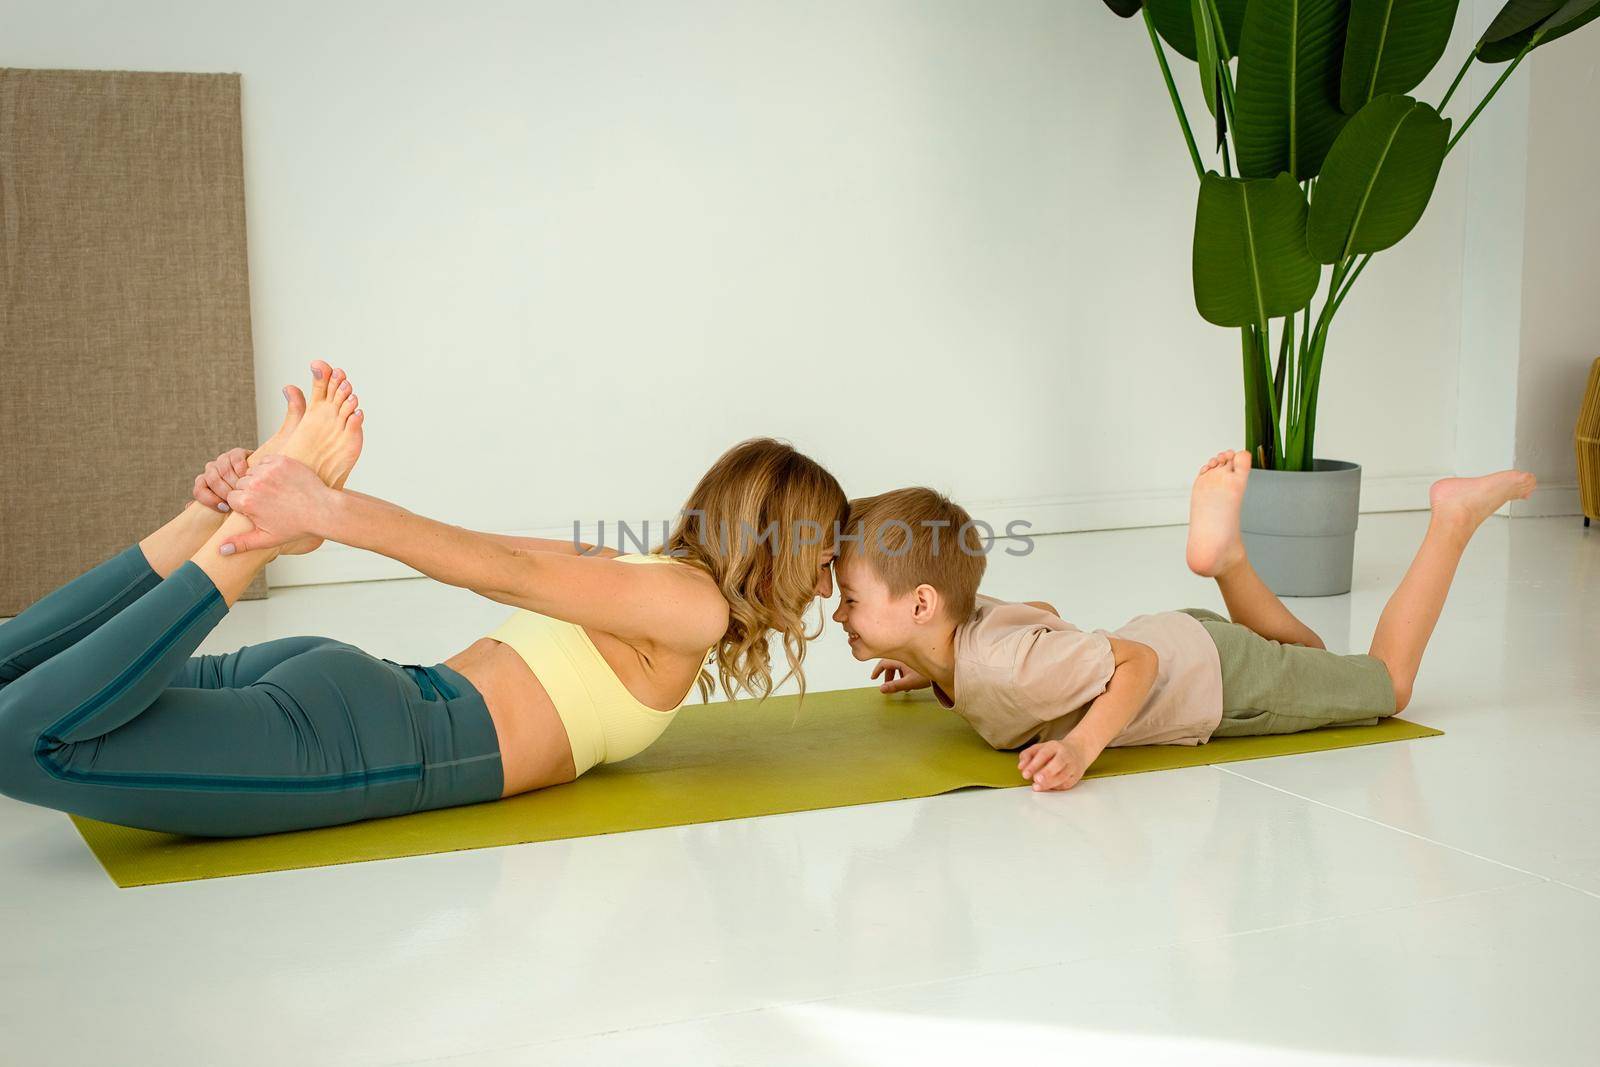 Happy woman doing yoga with a little cute boy lies on a green gym mat in the room. copy space.